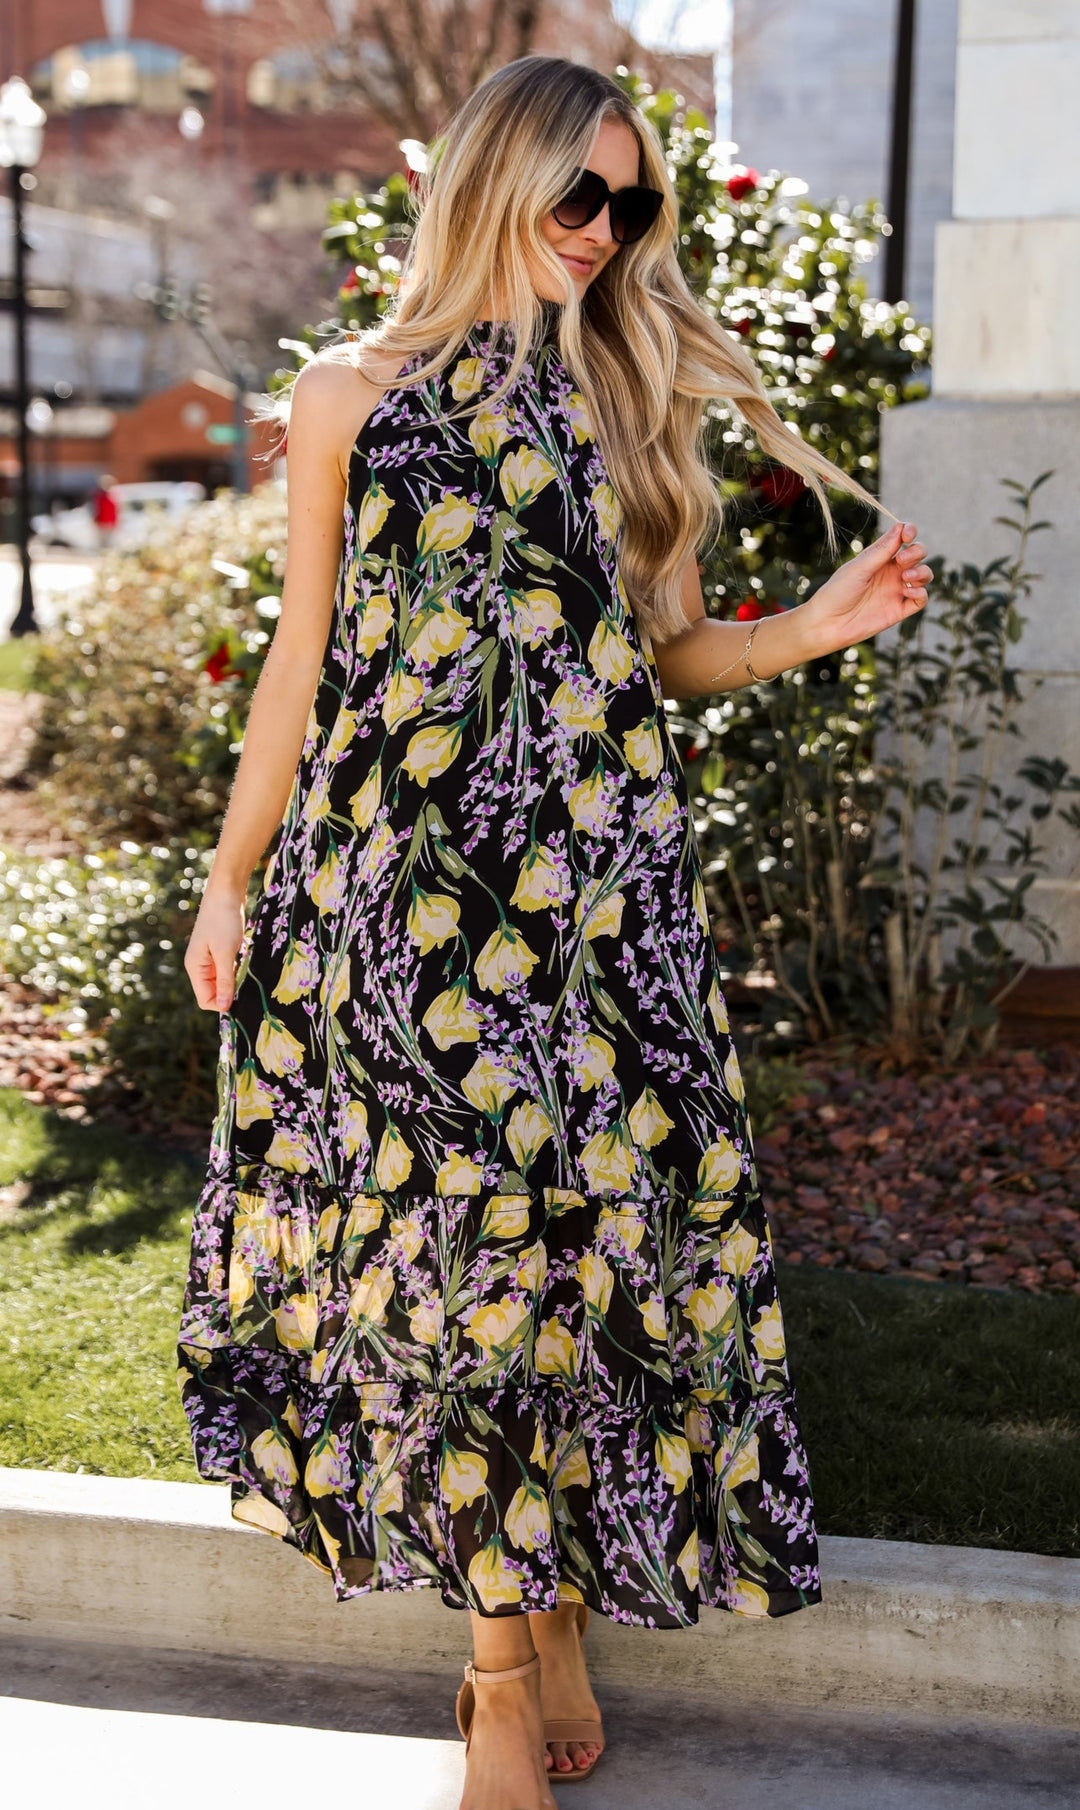 Sunny Day Sweetie Black Floral Maxi Dress Black Floral Maxi Dress